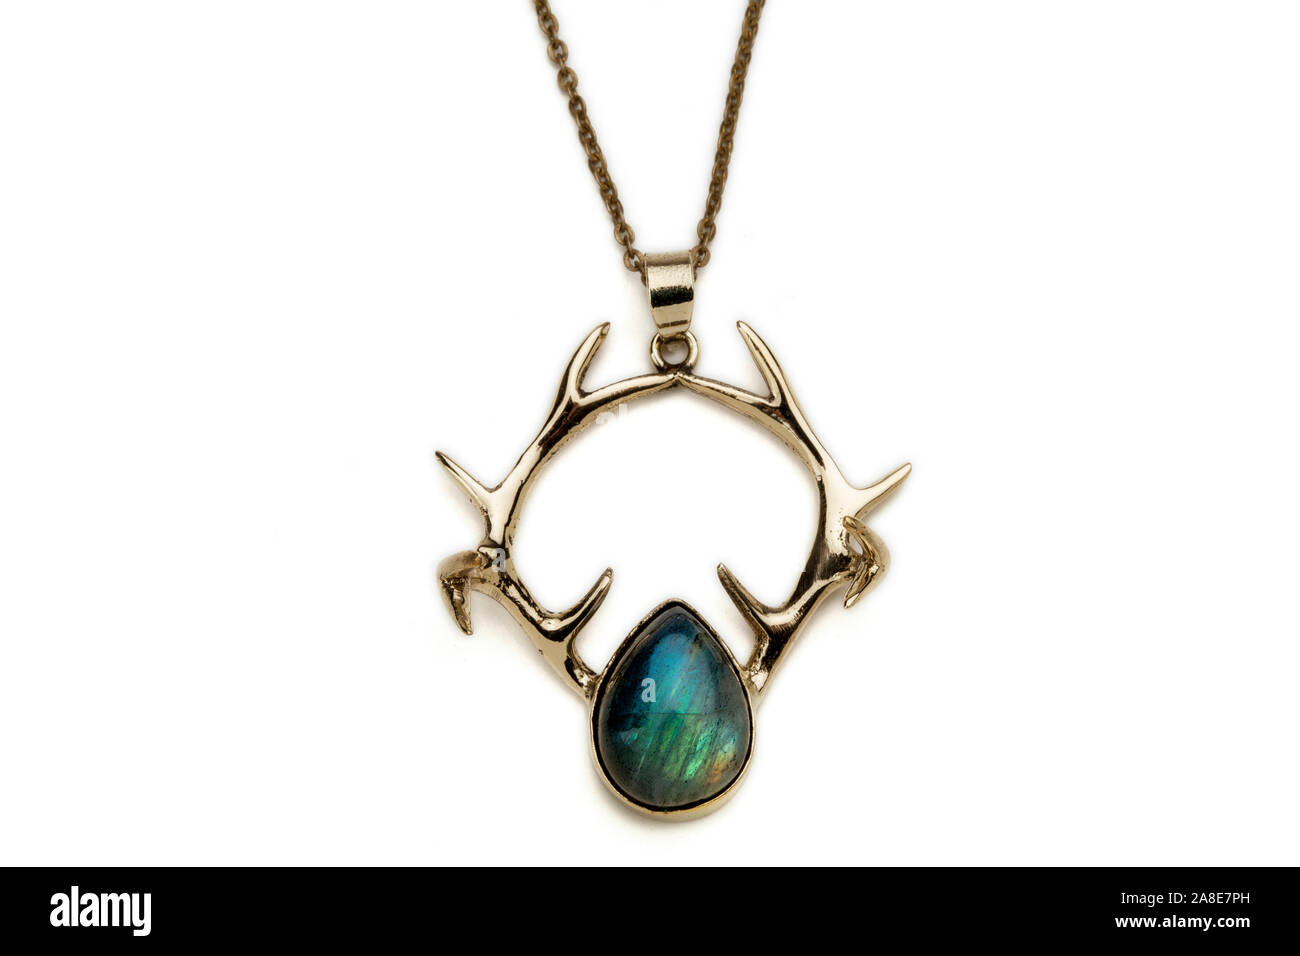 Silver stag antlers and labradorite necklace pendant. Stock Photo